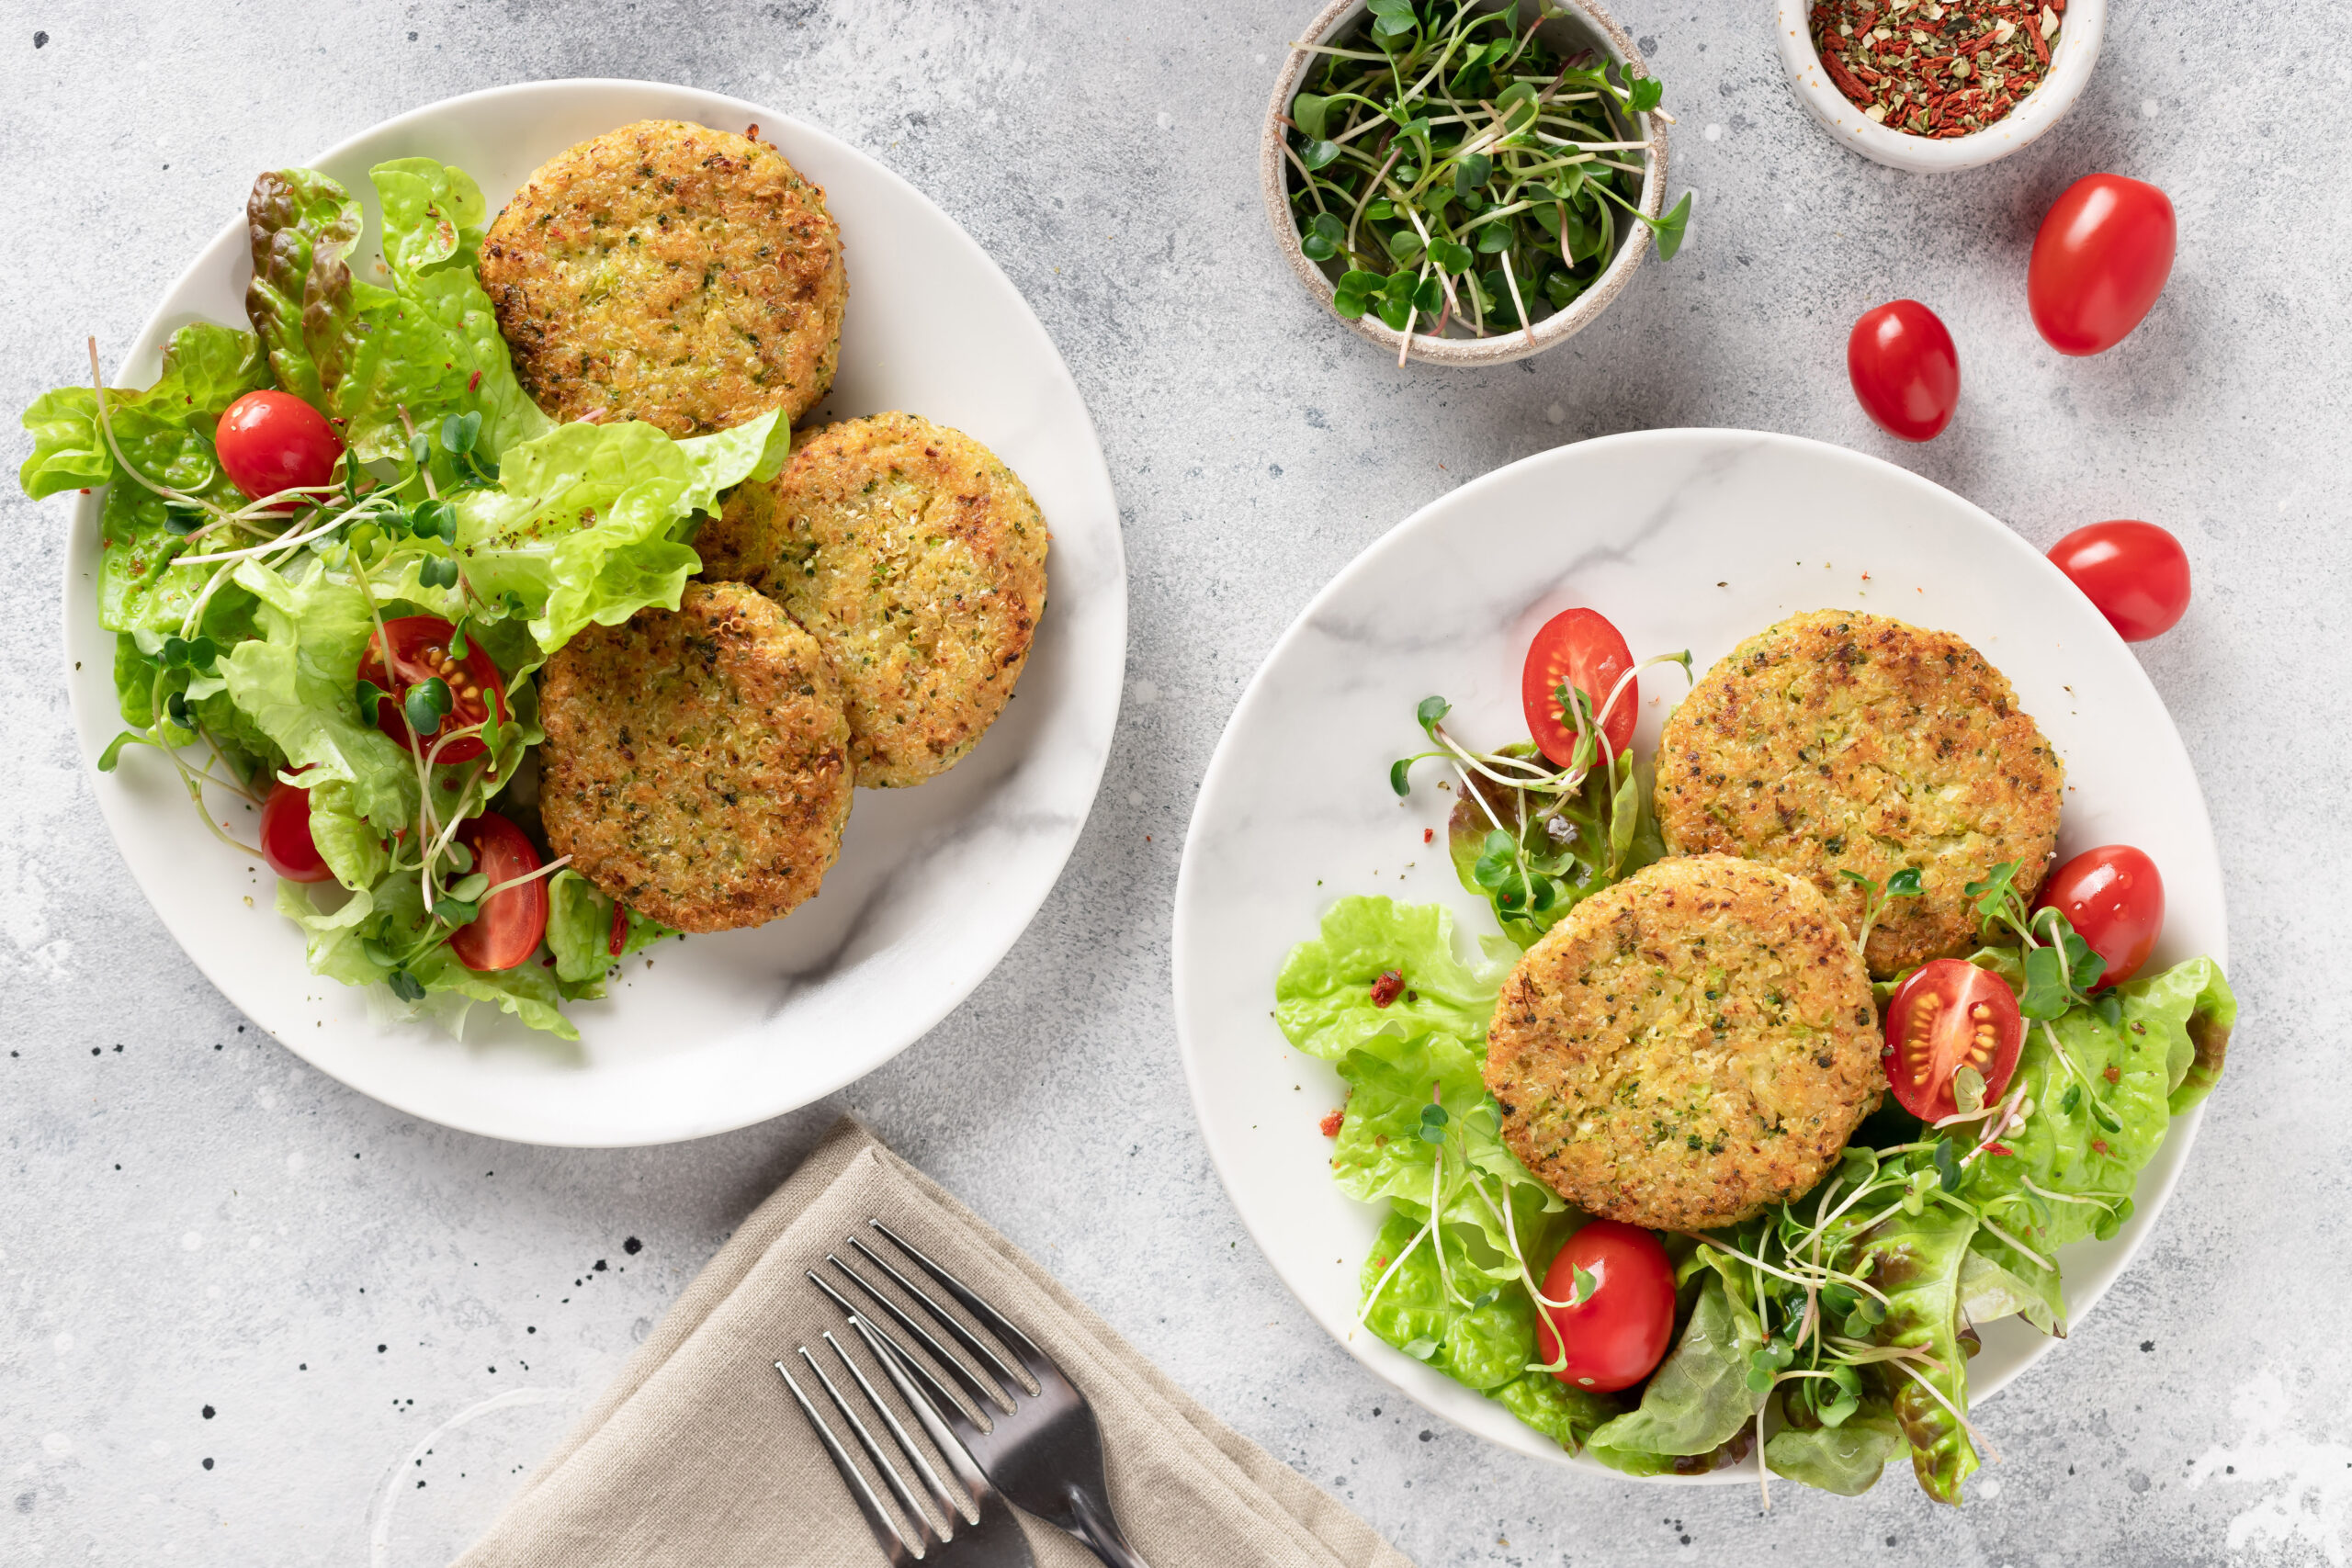 Vegan burgers with quinoa, broccoli in plates with salad. Vegan healthy lunch or dinner. Table setting.